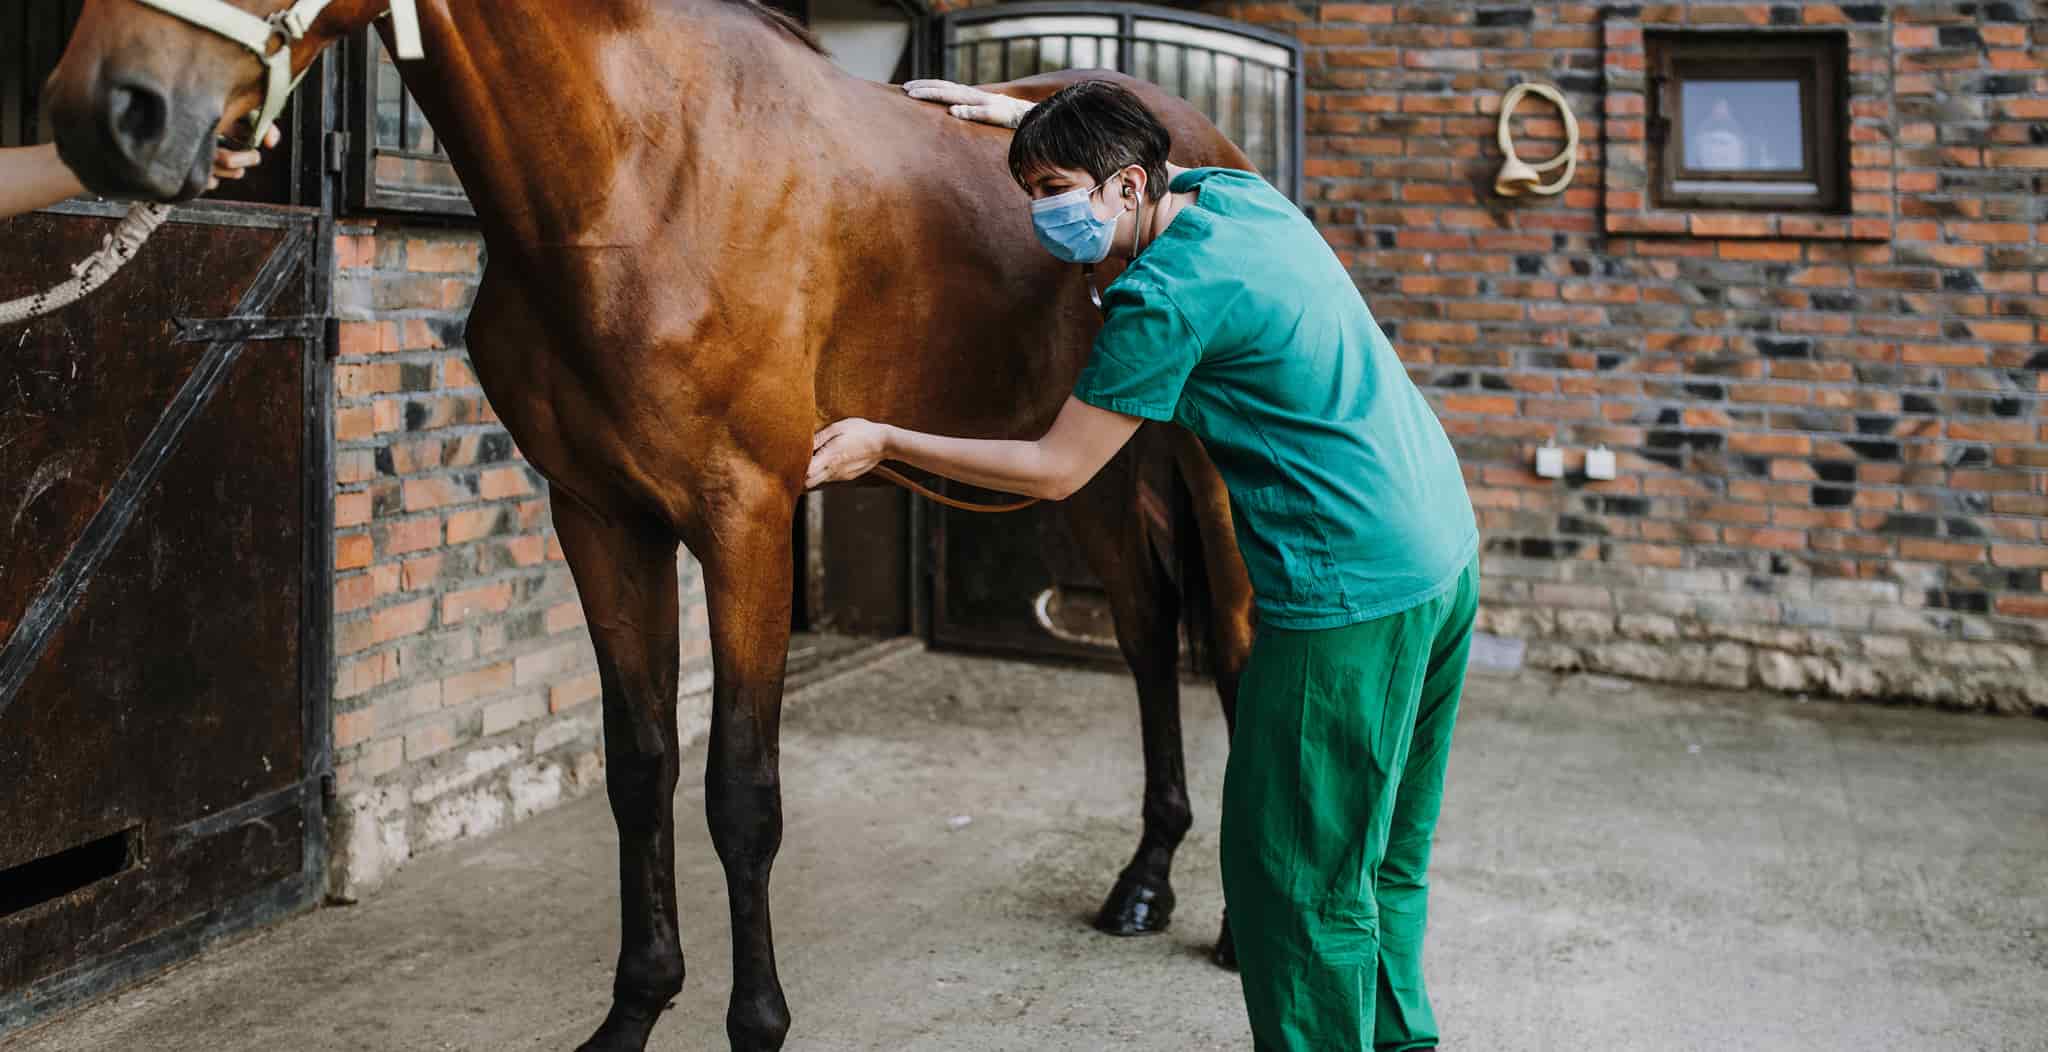 EQU StreamZ. Equine lameness usually refers to a condition in which a horse's gait or posture is irregular. Pain, a mechanical issue, or a neurological disorder can all contribute to lameness.